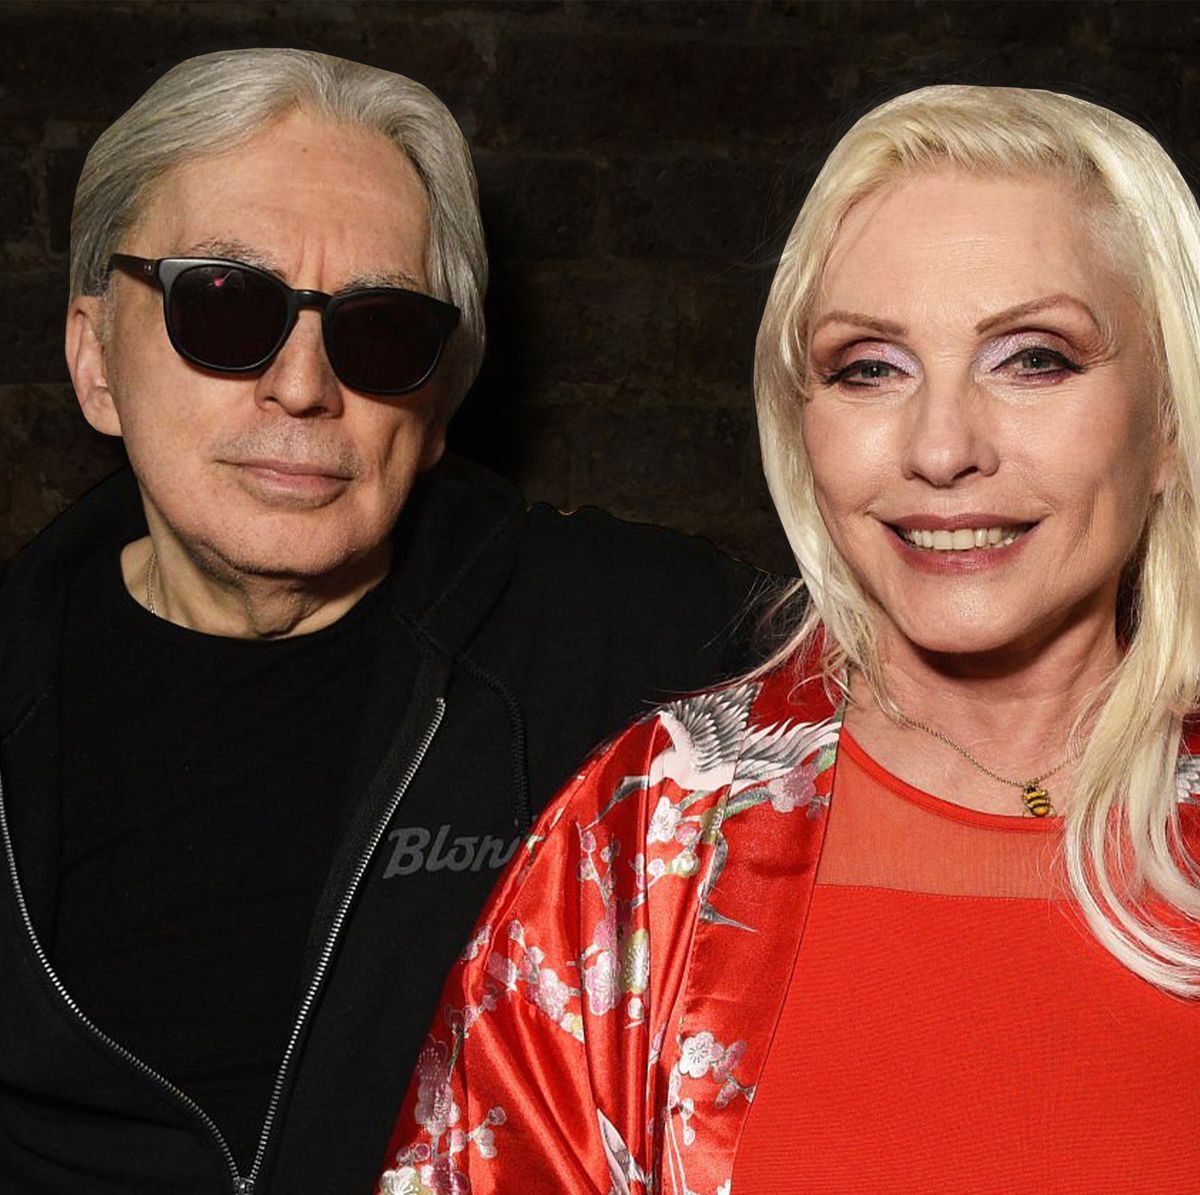 Blondie S Debbie Harry And Chris Stein On Legacy And Against The Odds New Box Set